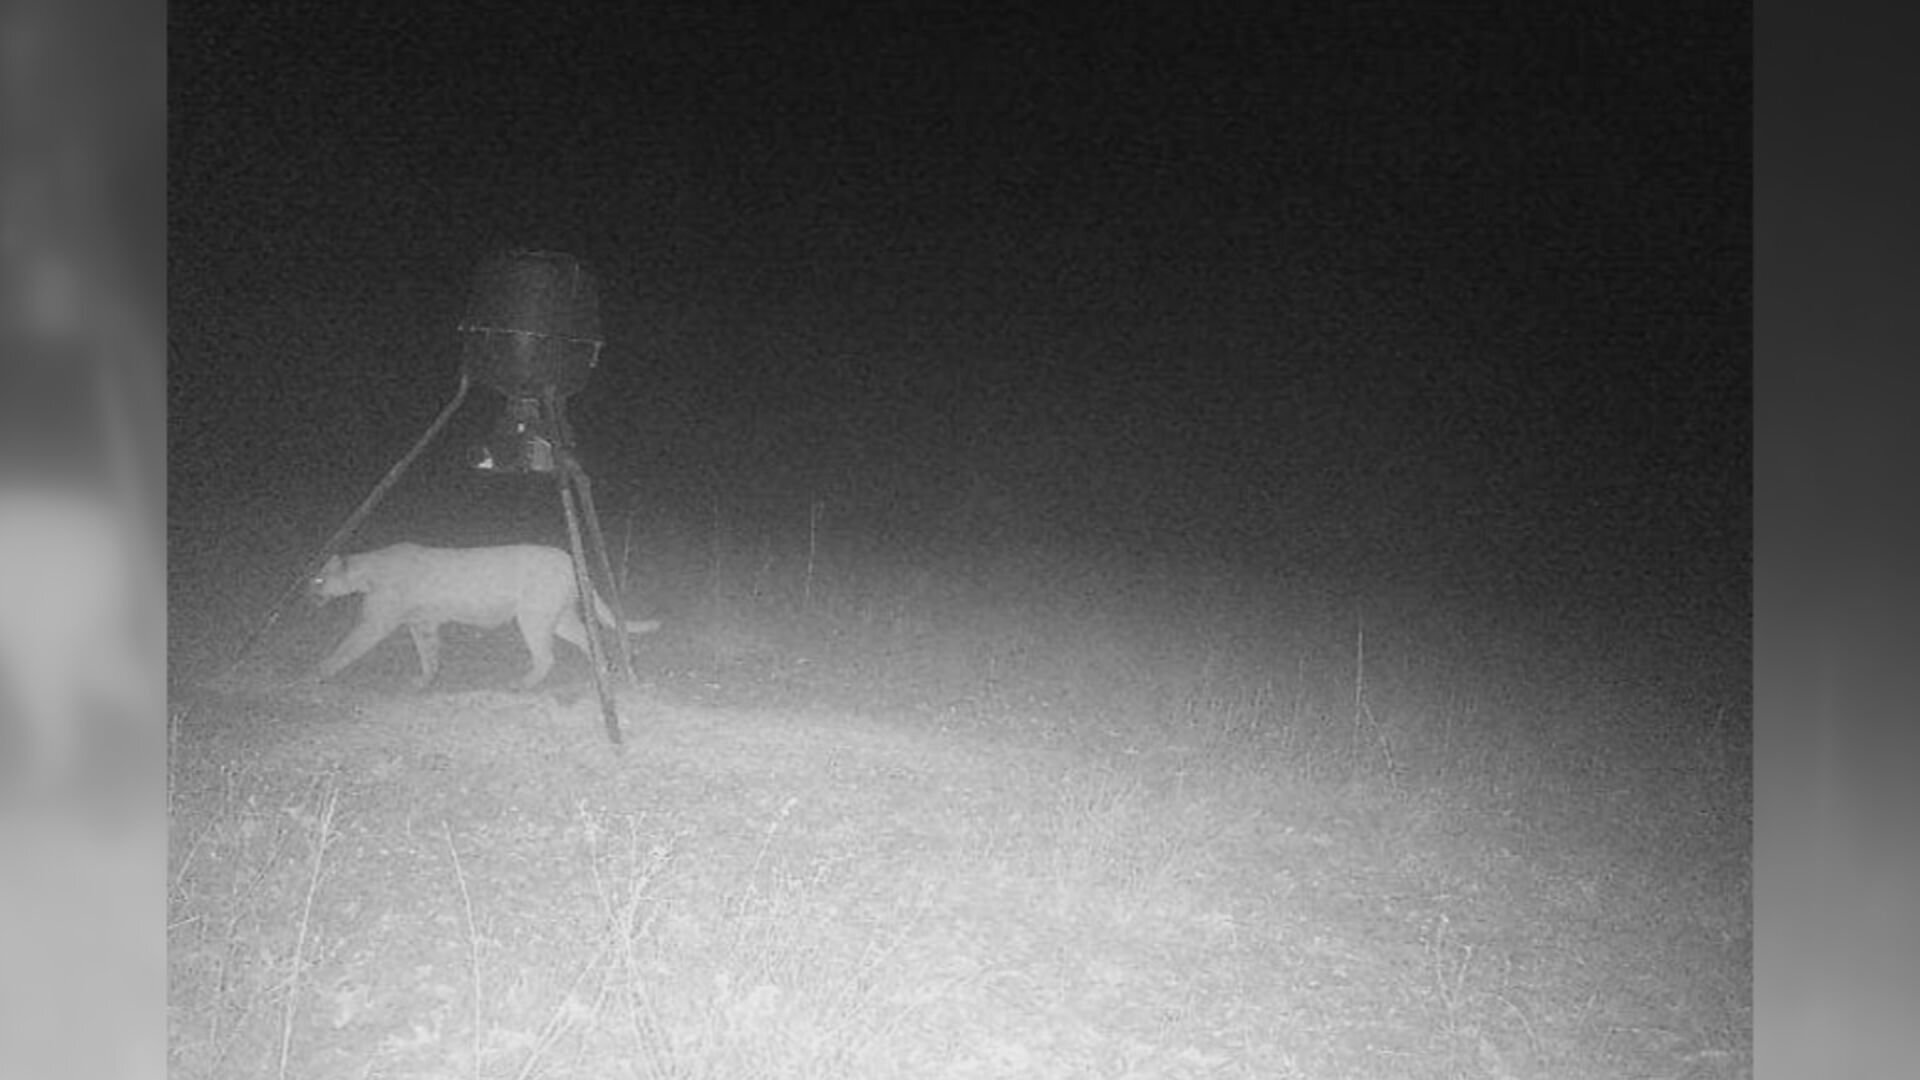 Mountain Lion Sighted On Trail Camera In Osage County